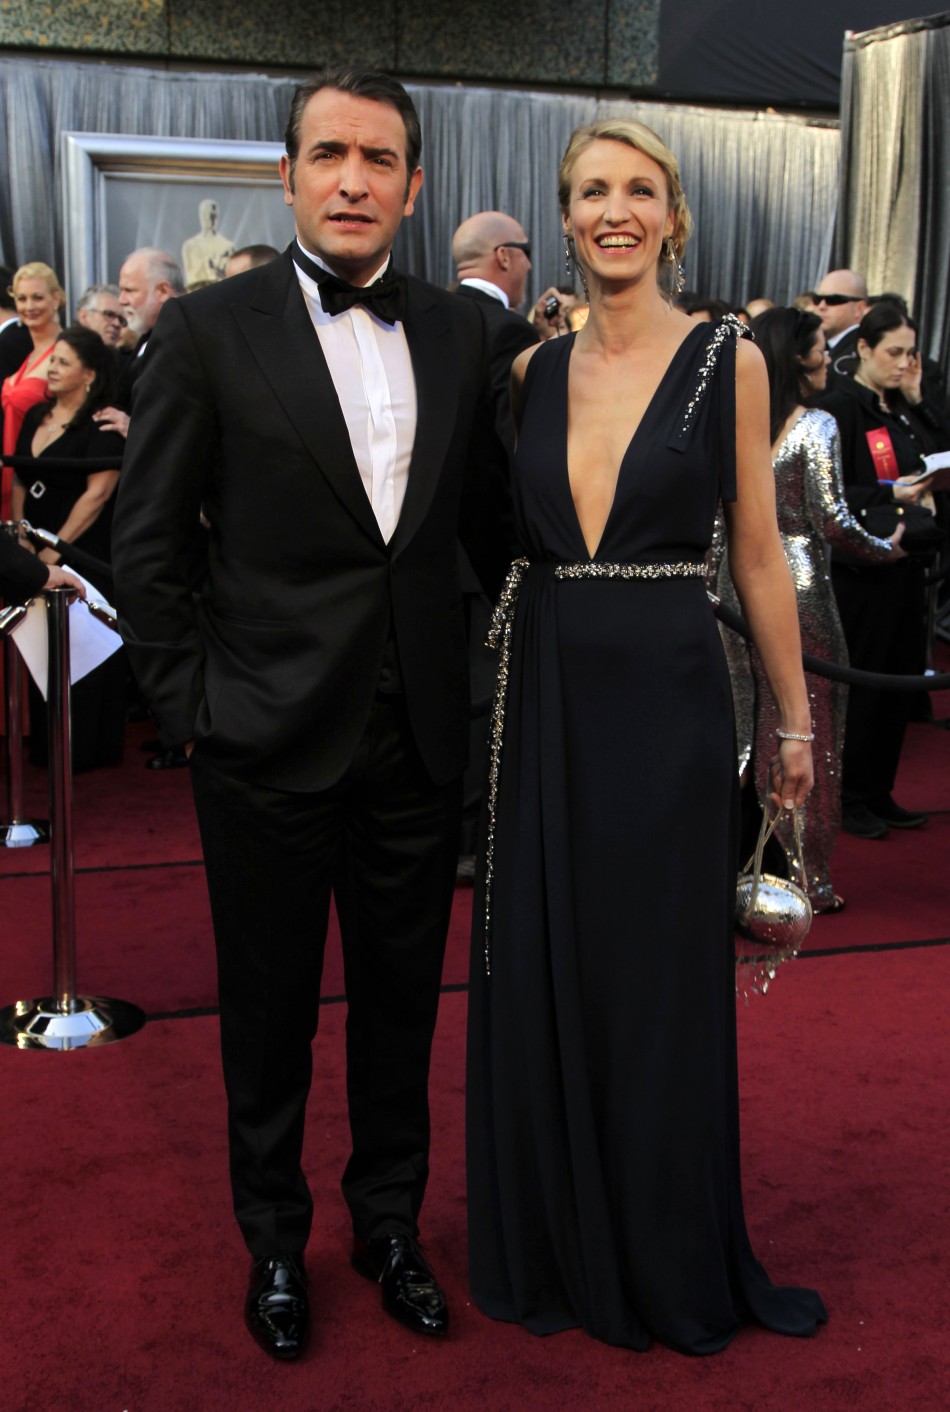 French actor Dujardin and his wife Alexandra Lamy arrive at the 84th Academy Awards in Hollywood